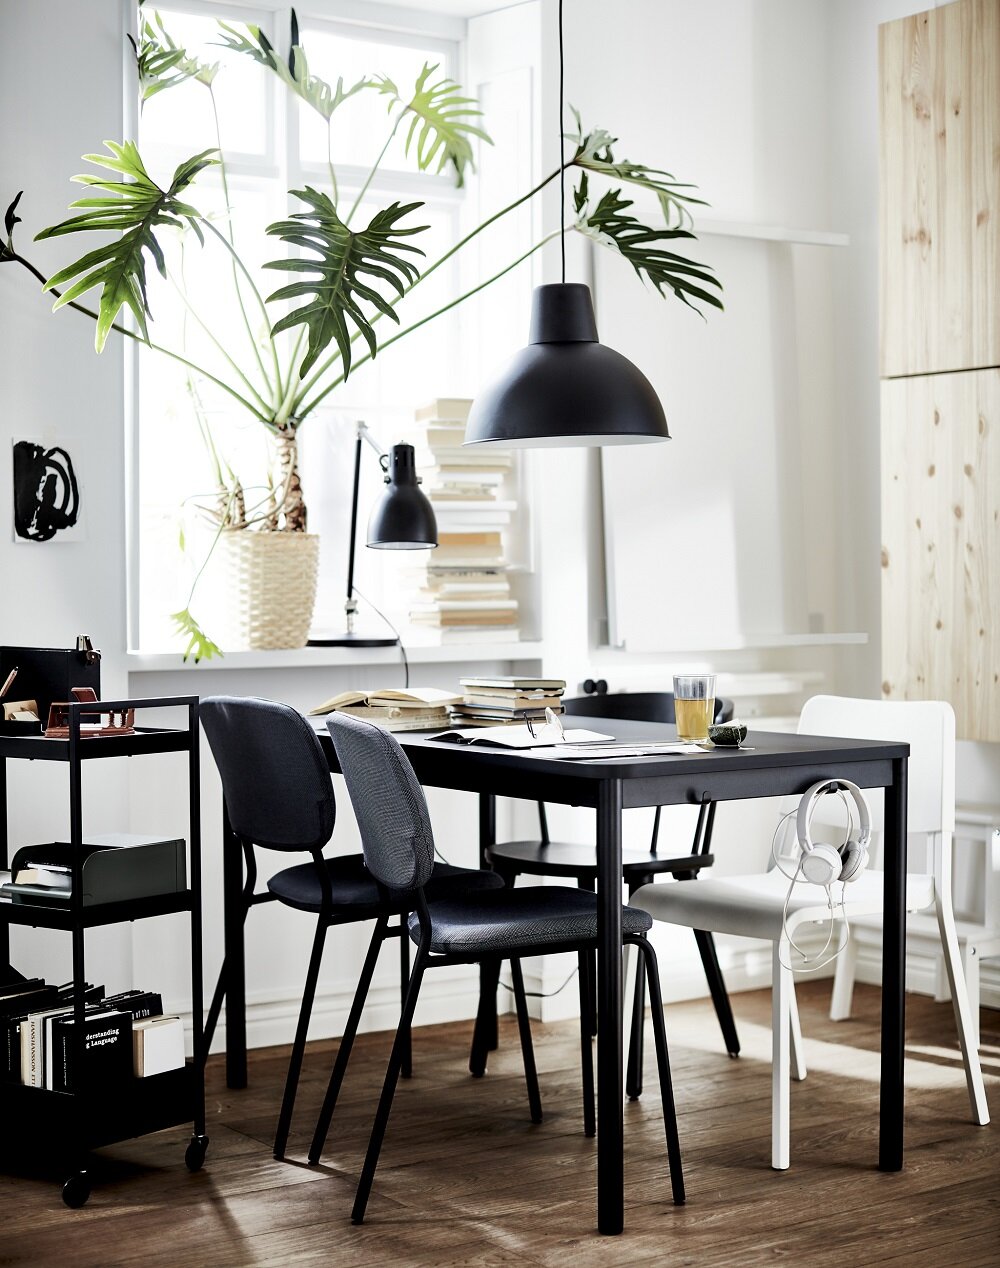 ikea catalog 2021 nordroom13 IKEA Catalog 2021 | A Handbook For A Better Everyday Life at Home